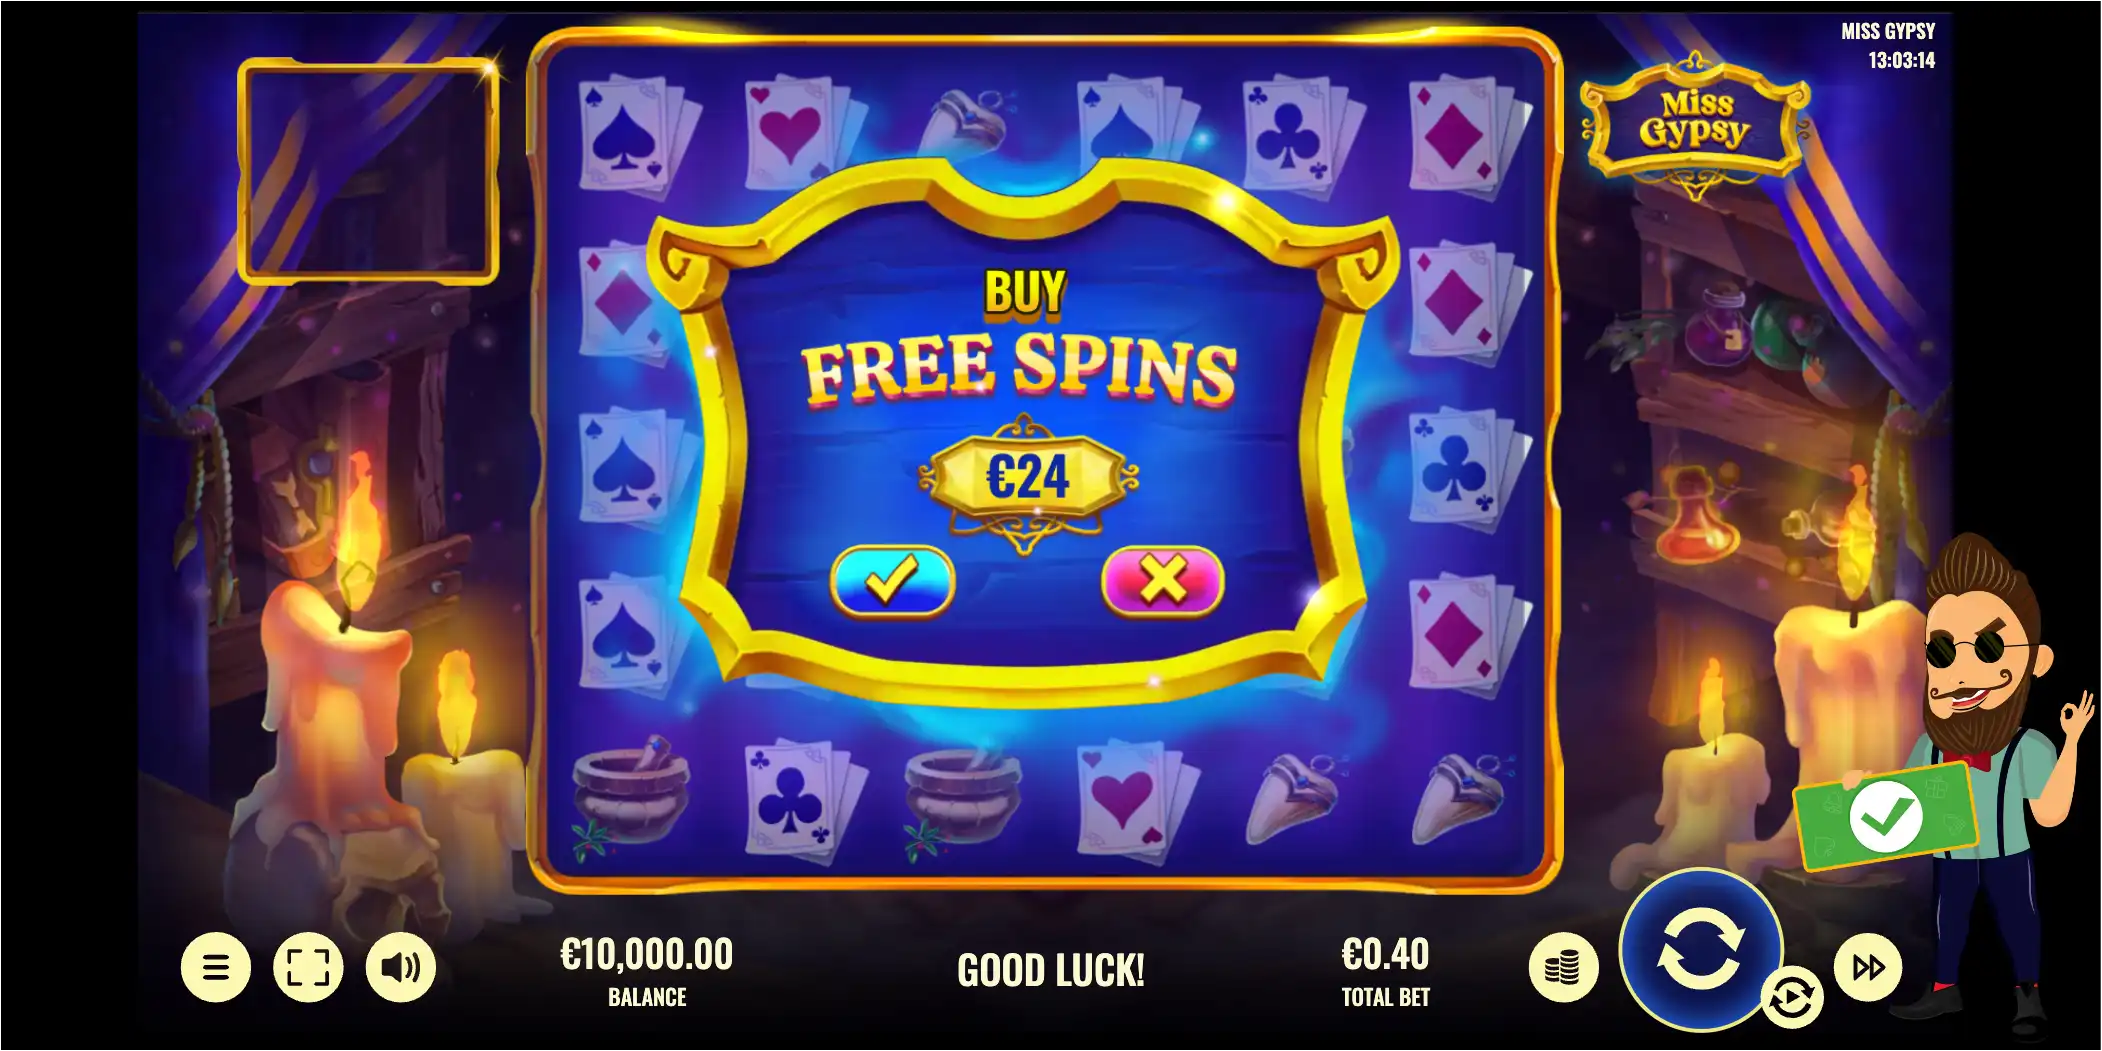 miss gypsy Free Spins Feature